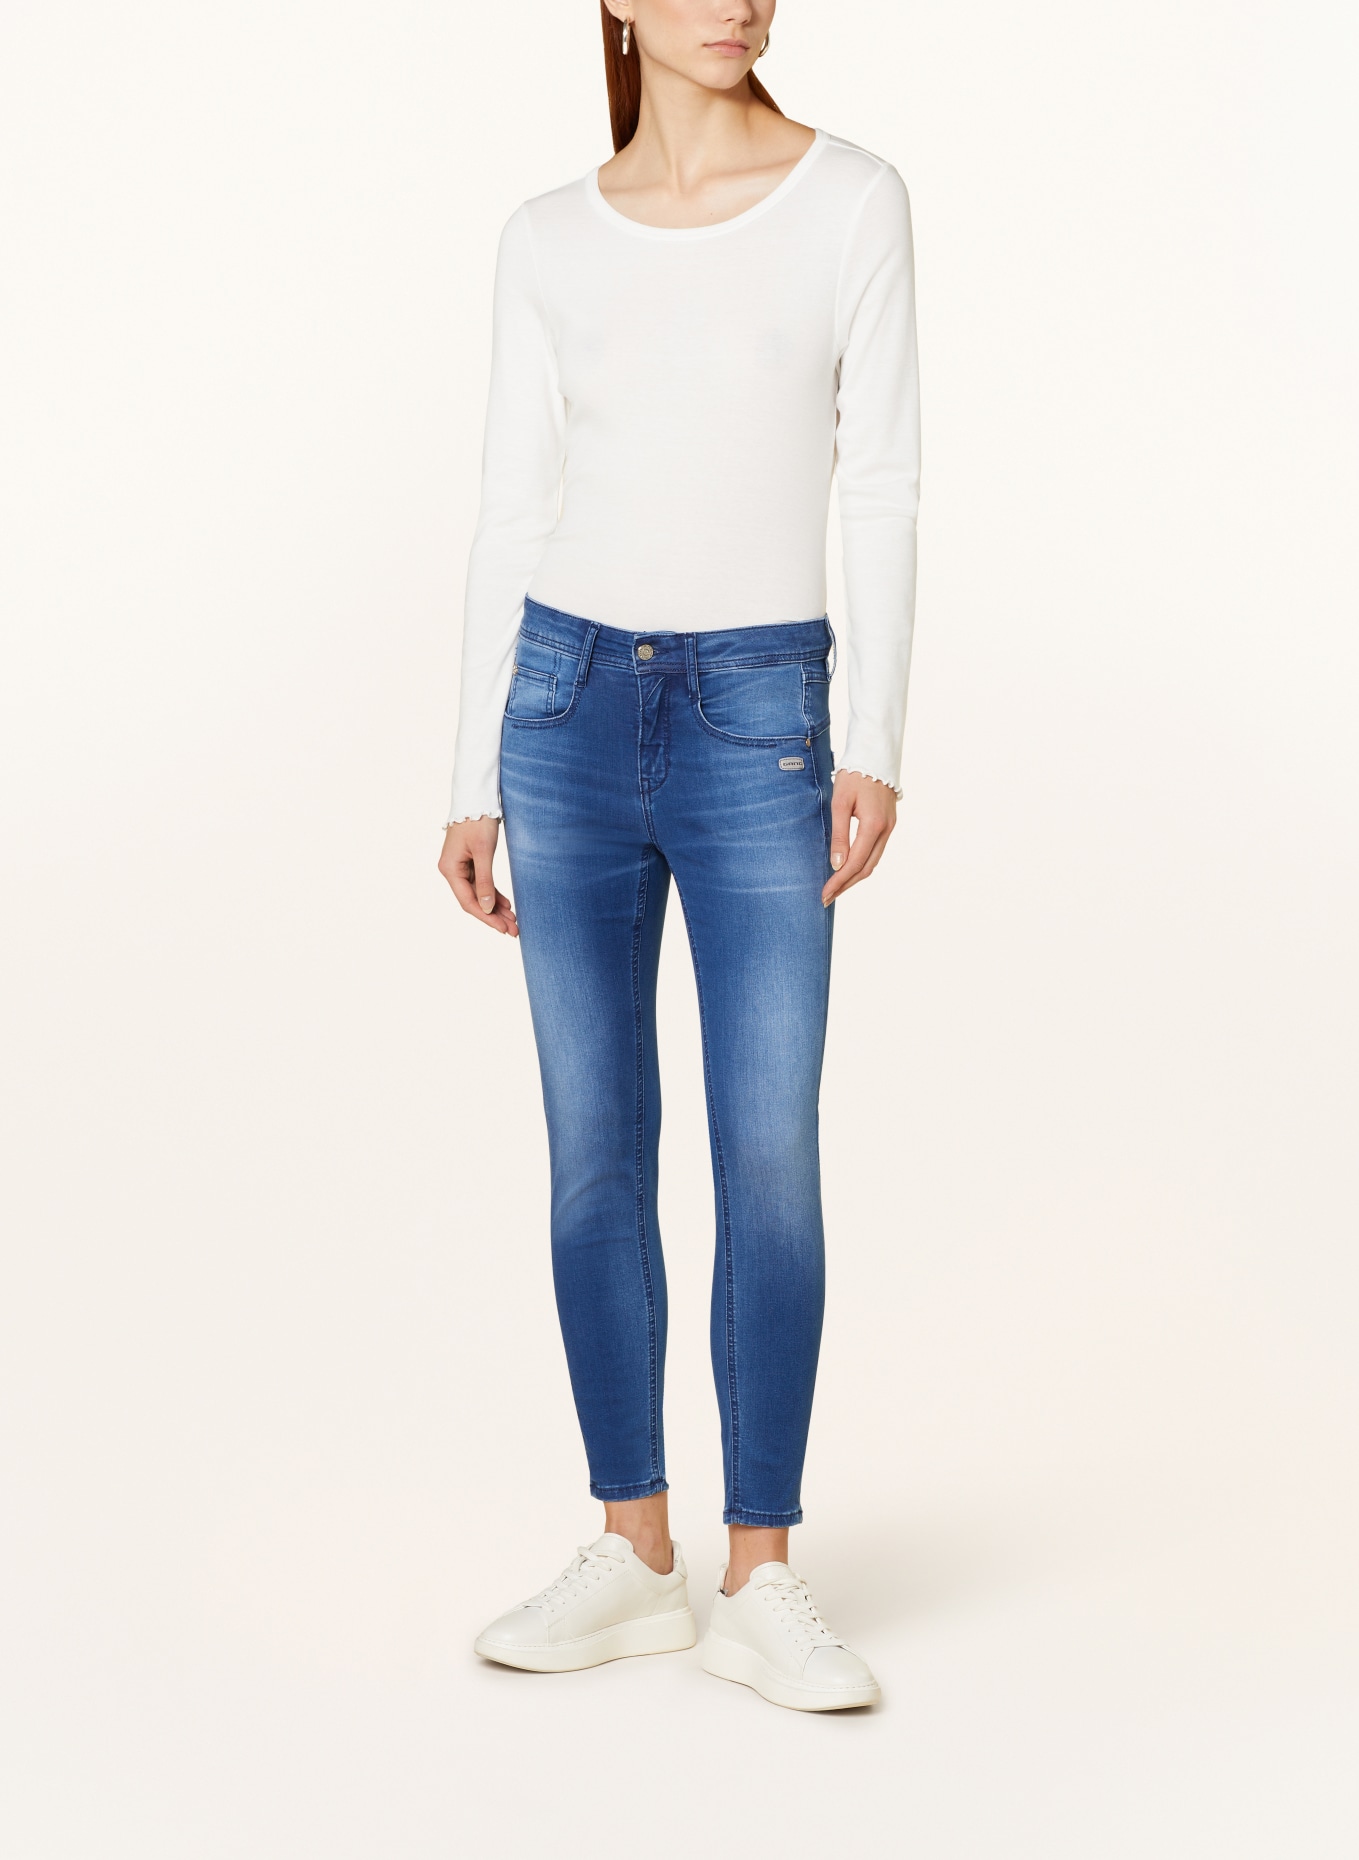 GANG Jeans AMELIE, Farbe: 7760 clam blue (Bild 2)